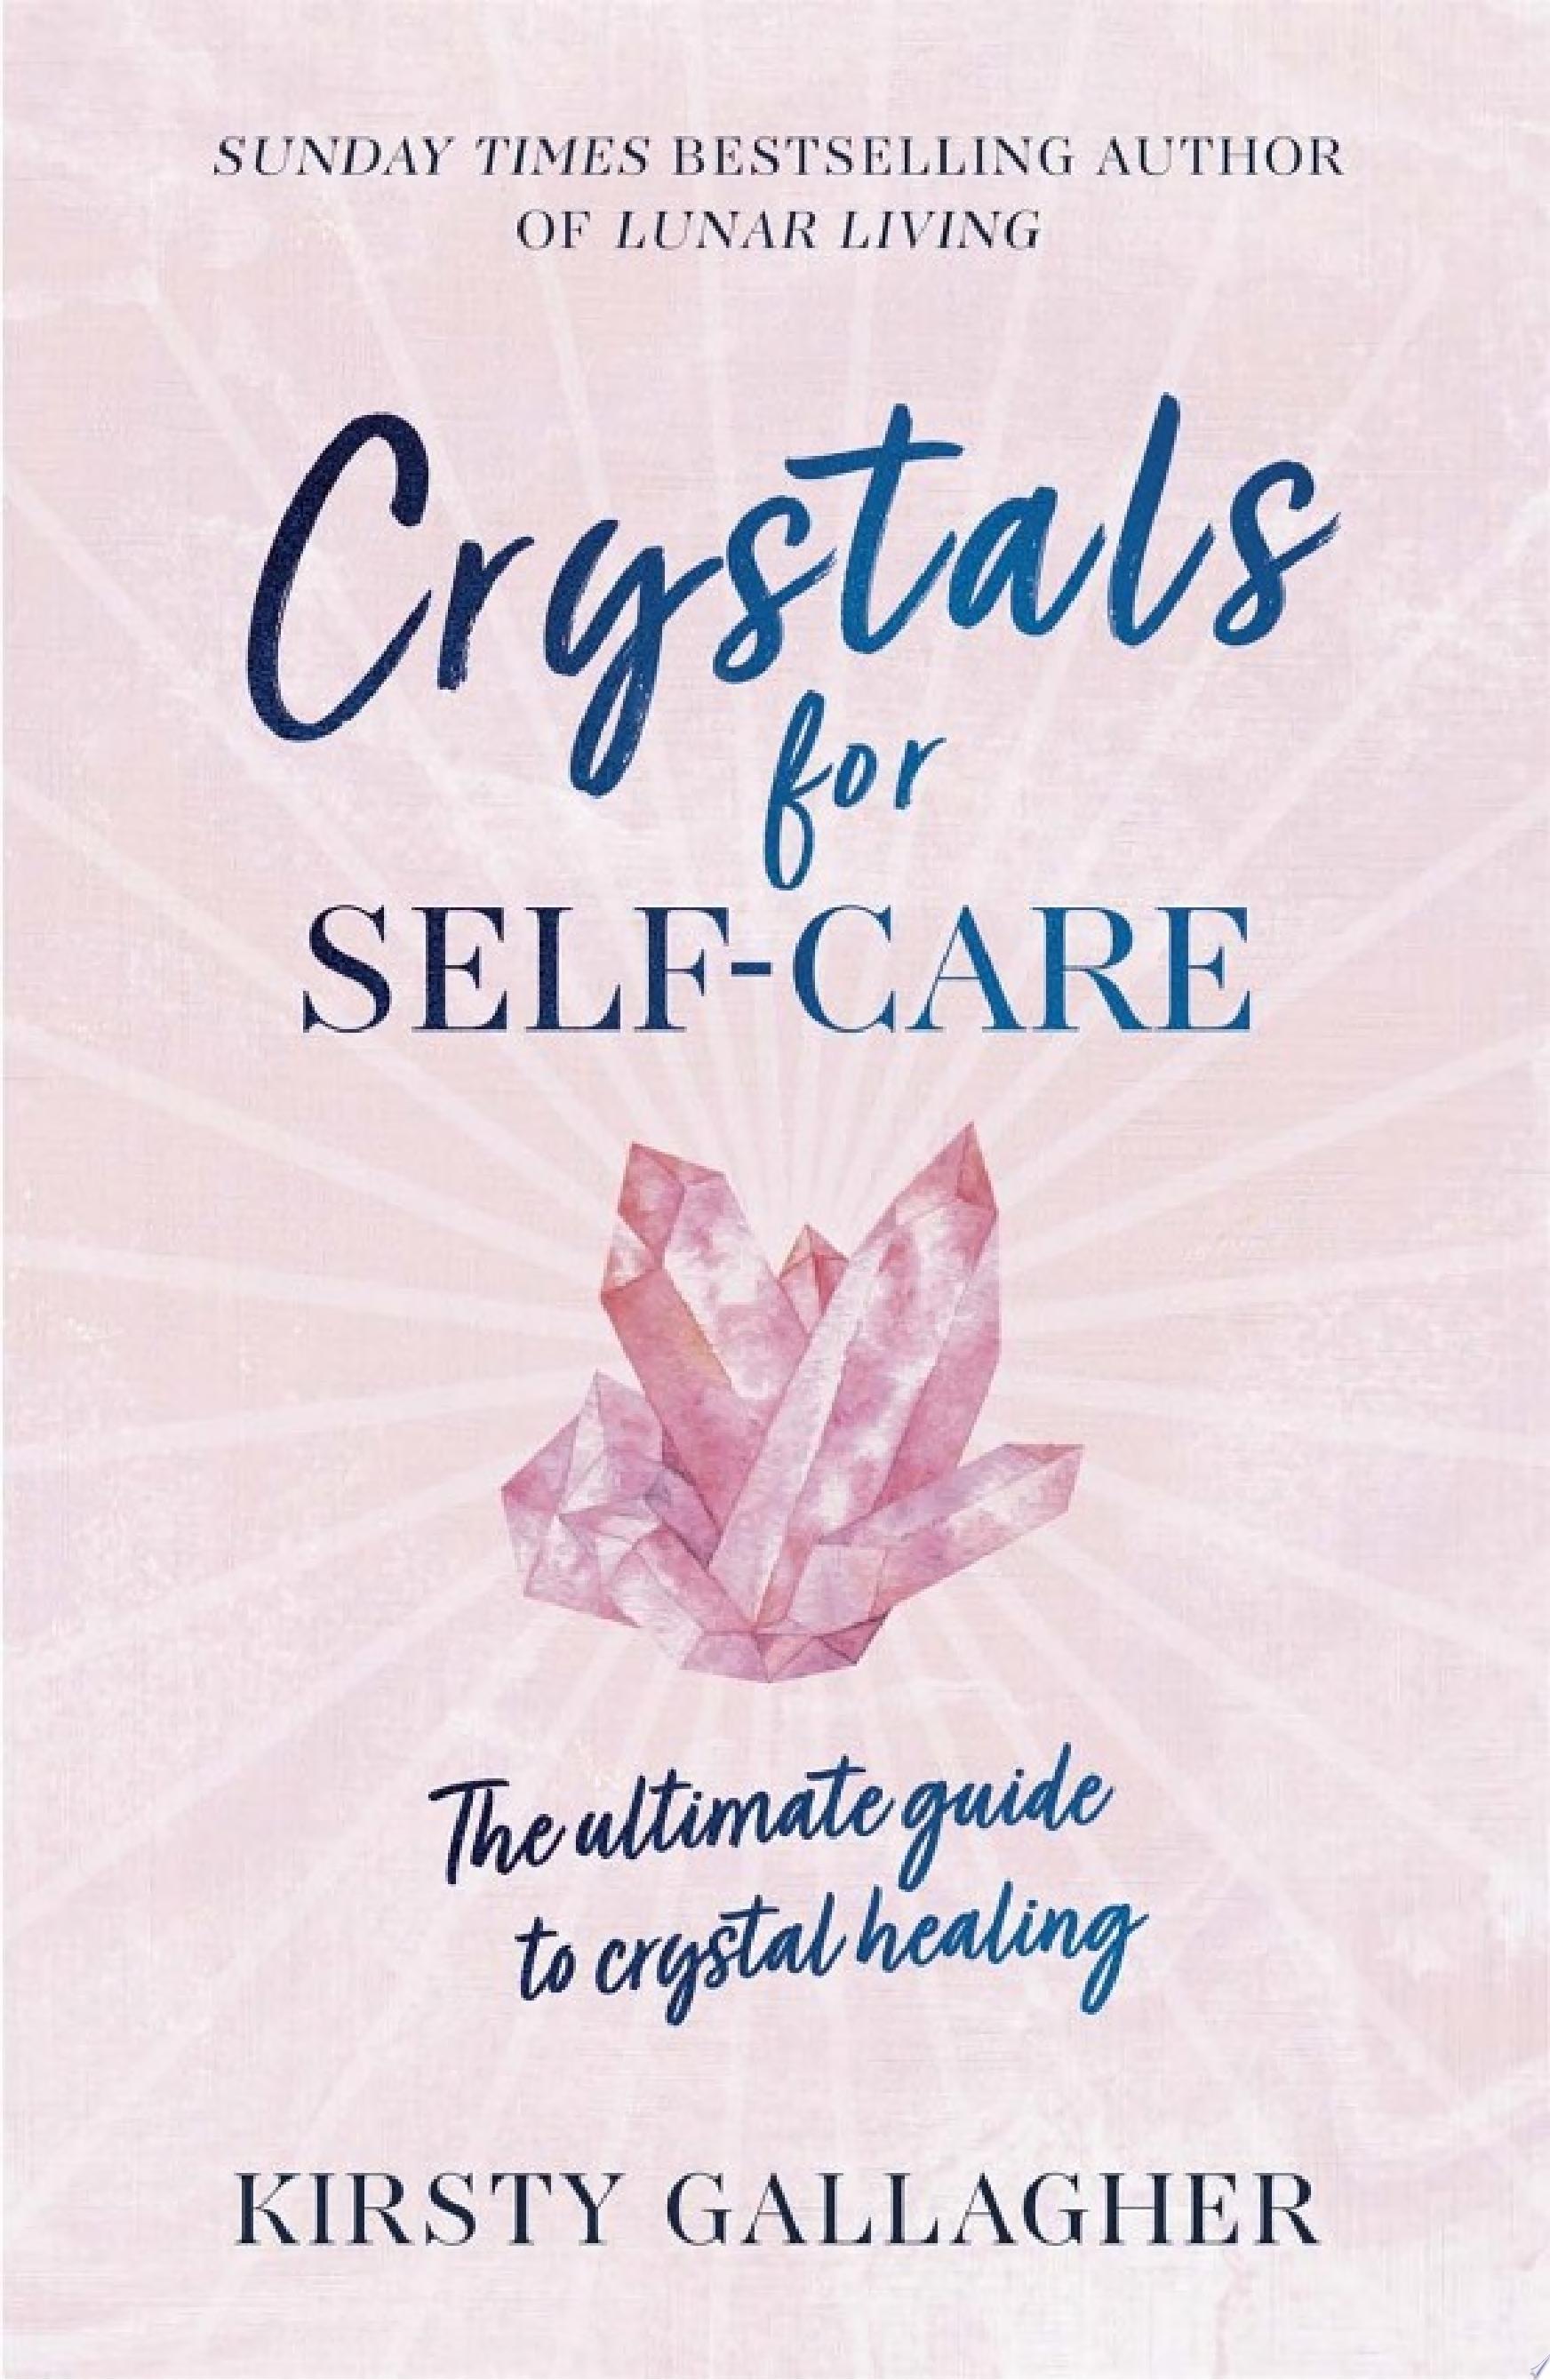 Image for "Crystals for Self-Care"